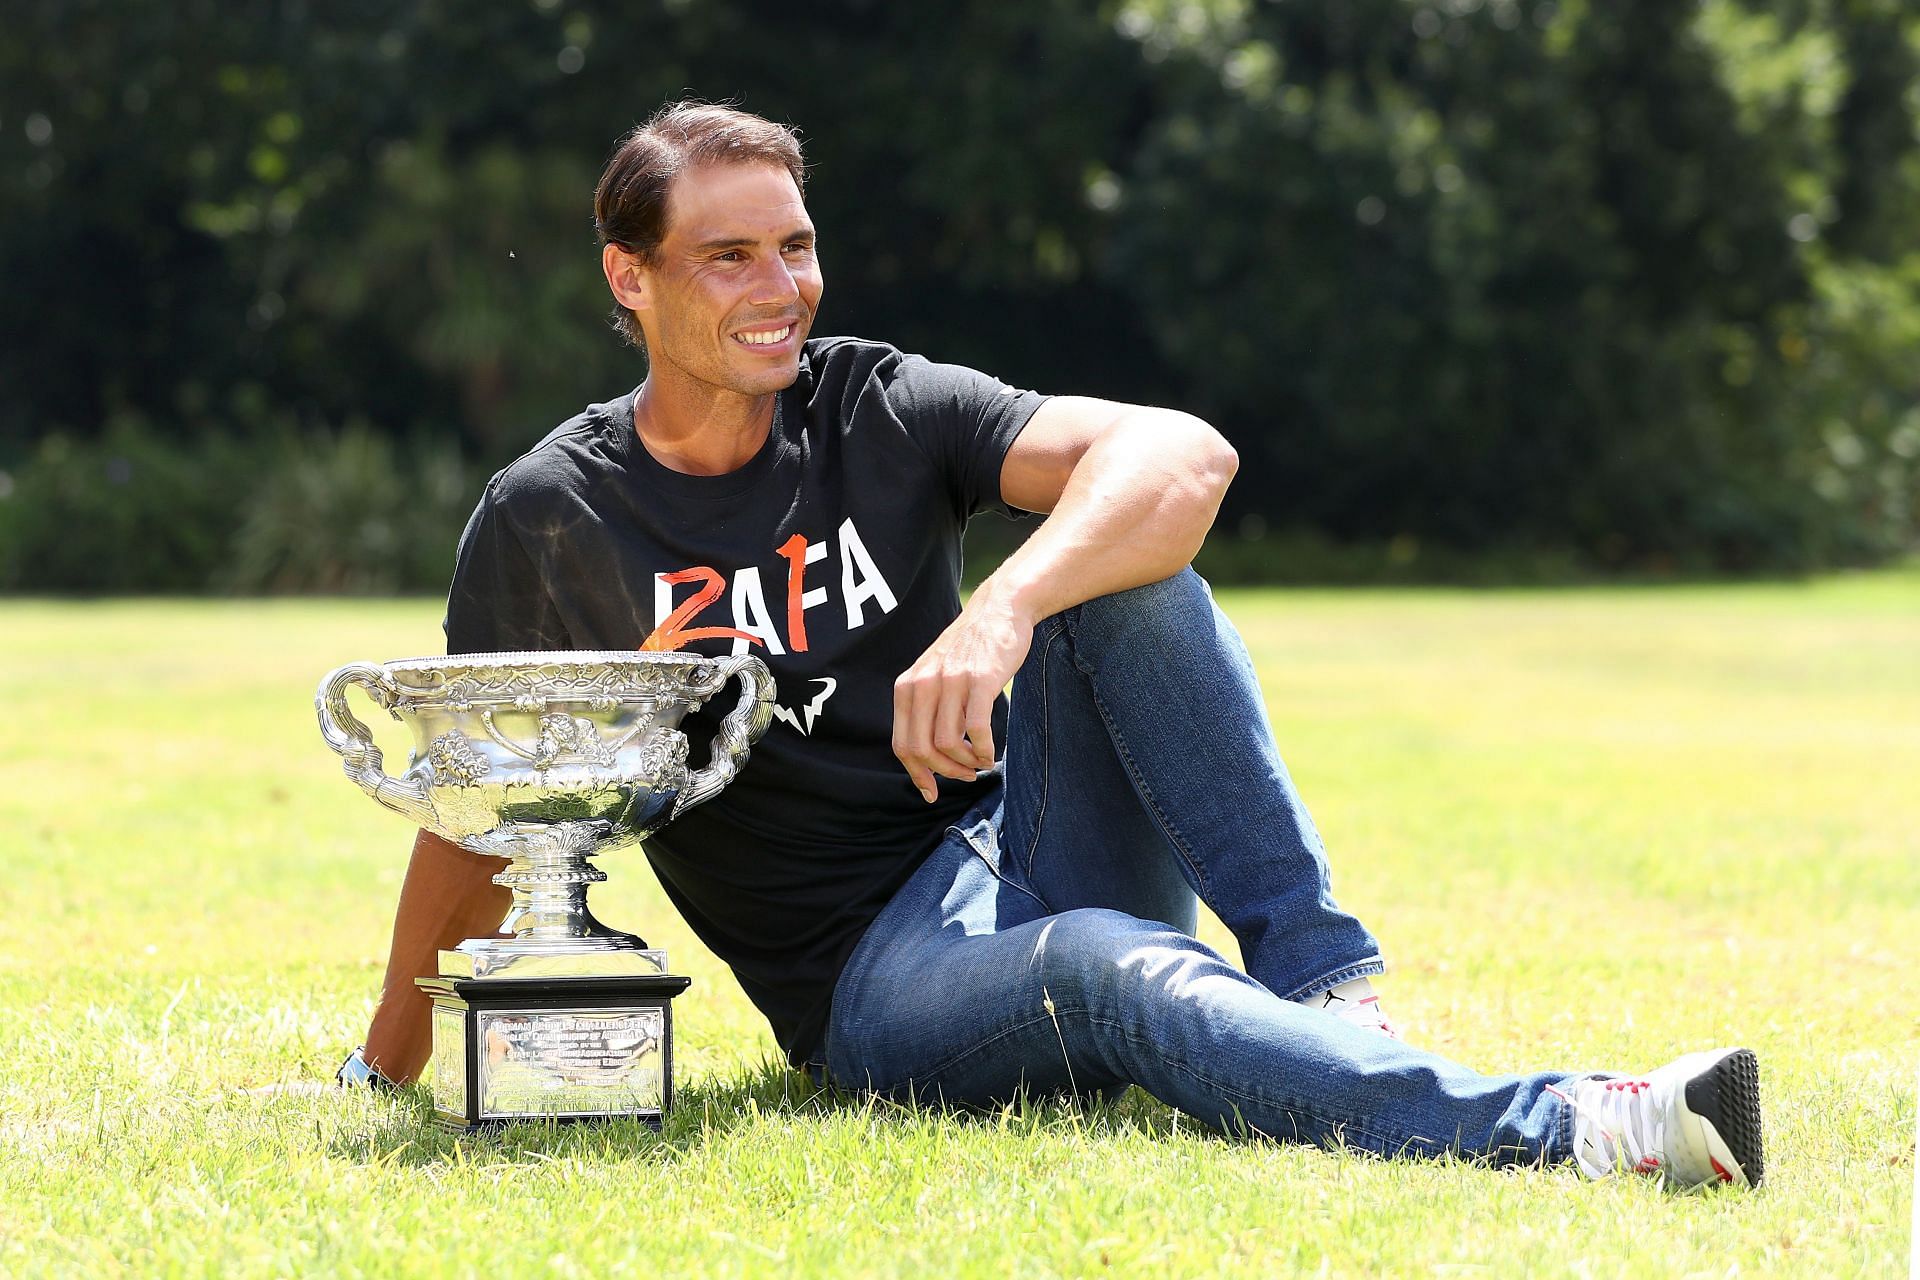 Rafael Nadal poses with the Australian Open trophy after the final.